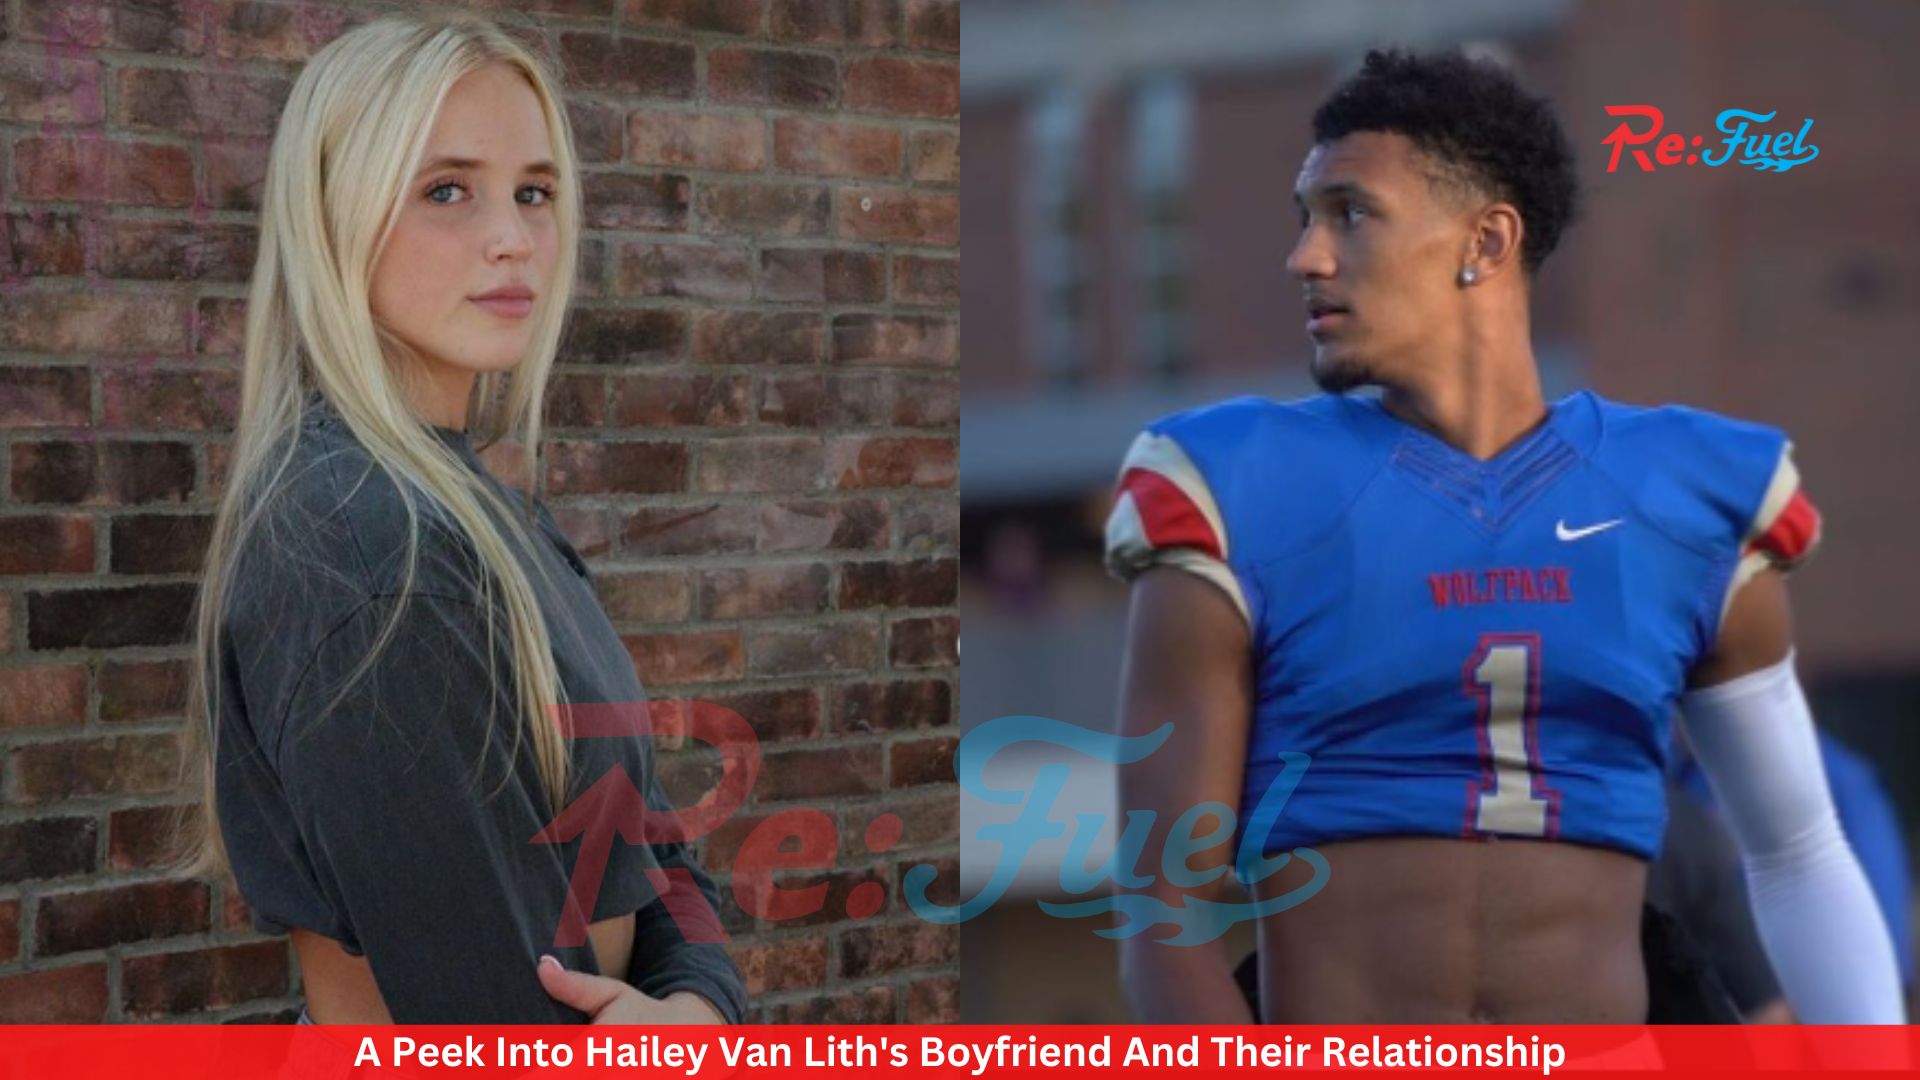 A Peek Into Hailey Van Lith's Boyfriend And Their Relationship